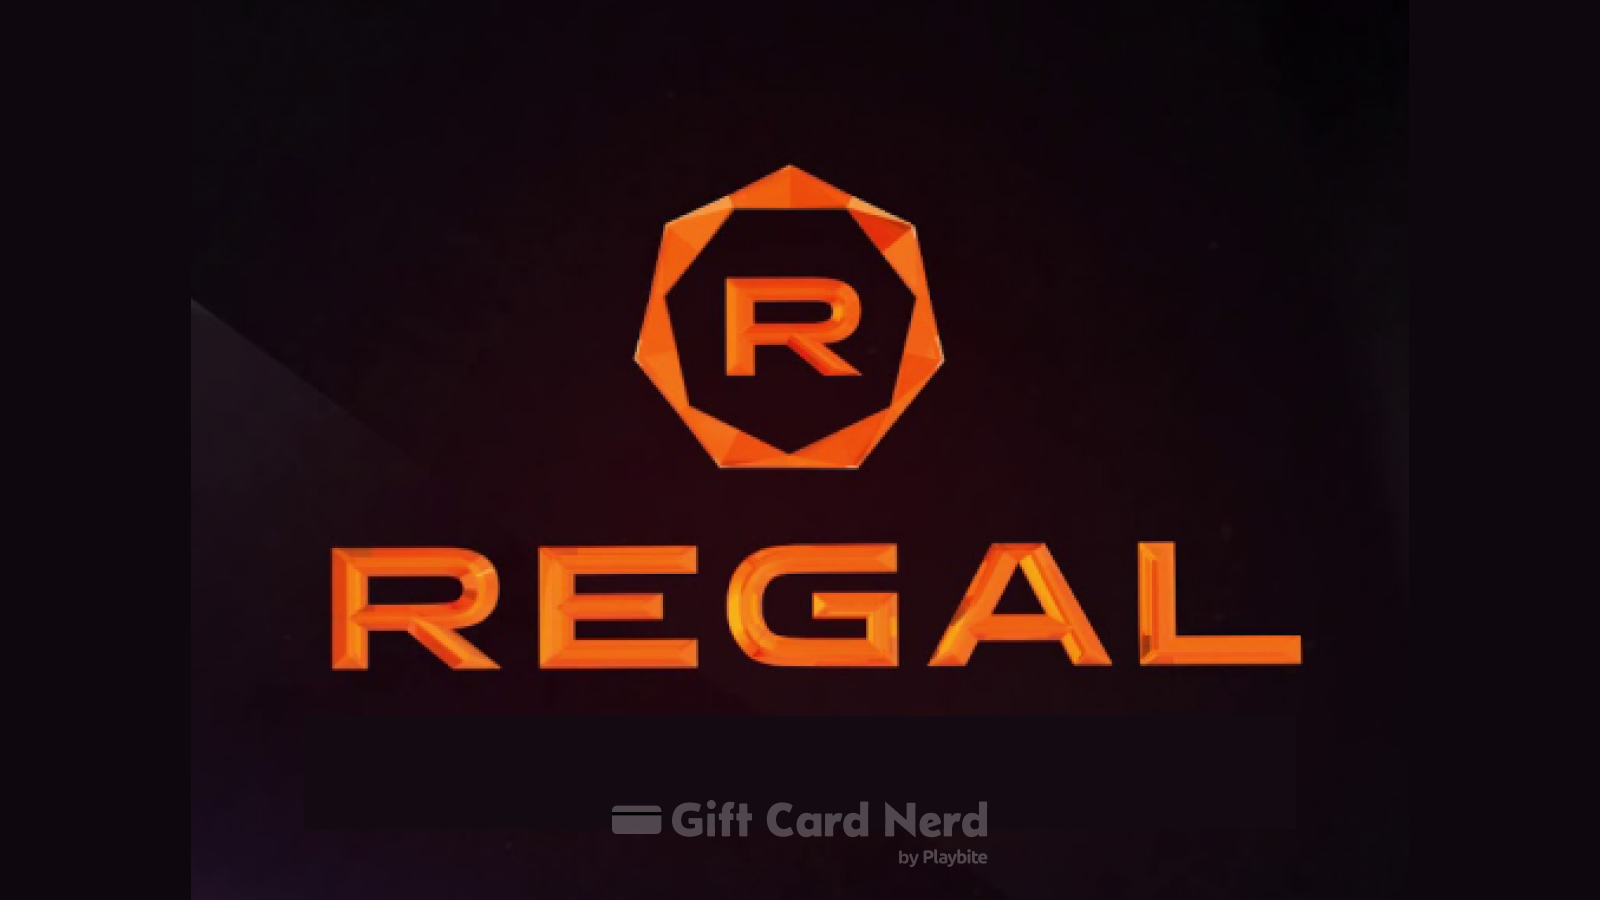 Where to Buy Regal Gift Cards: GameStop Edition